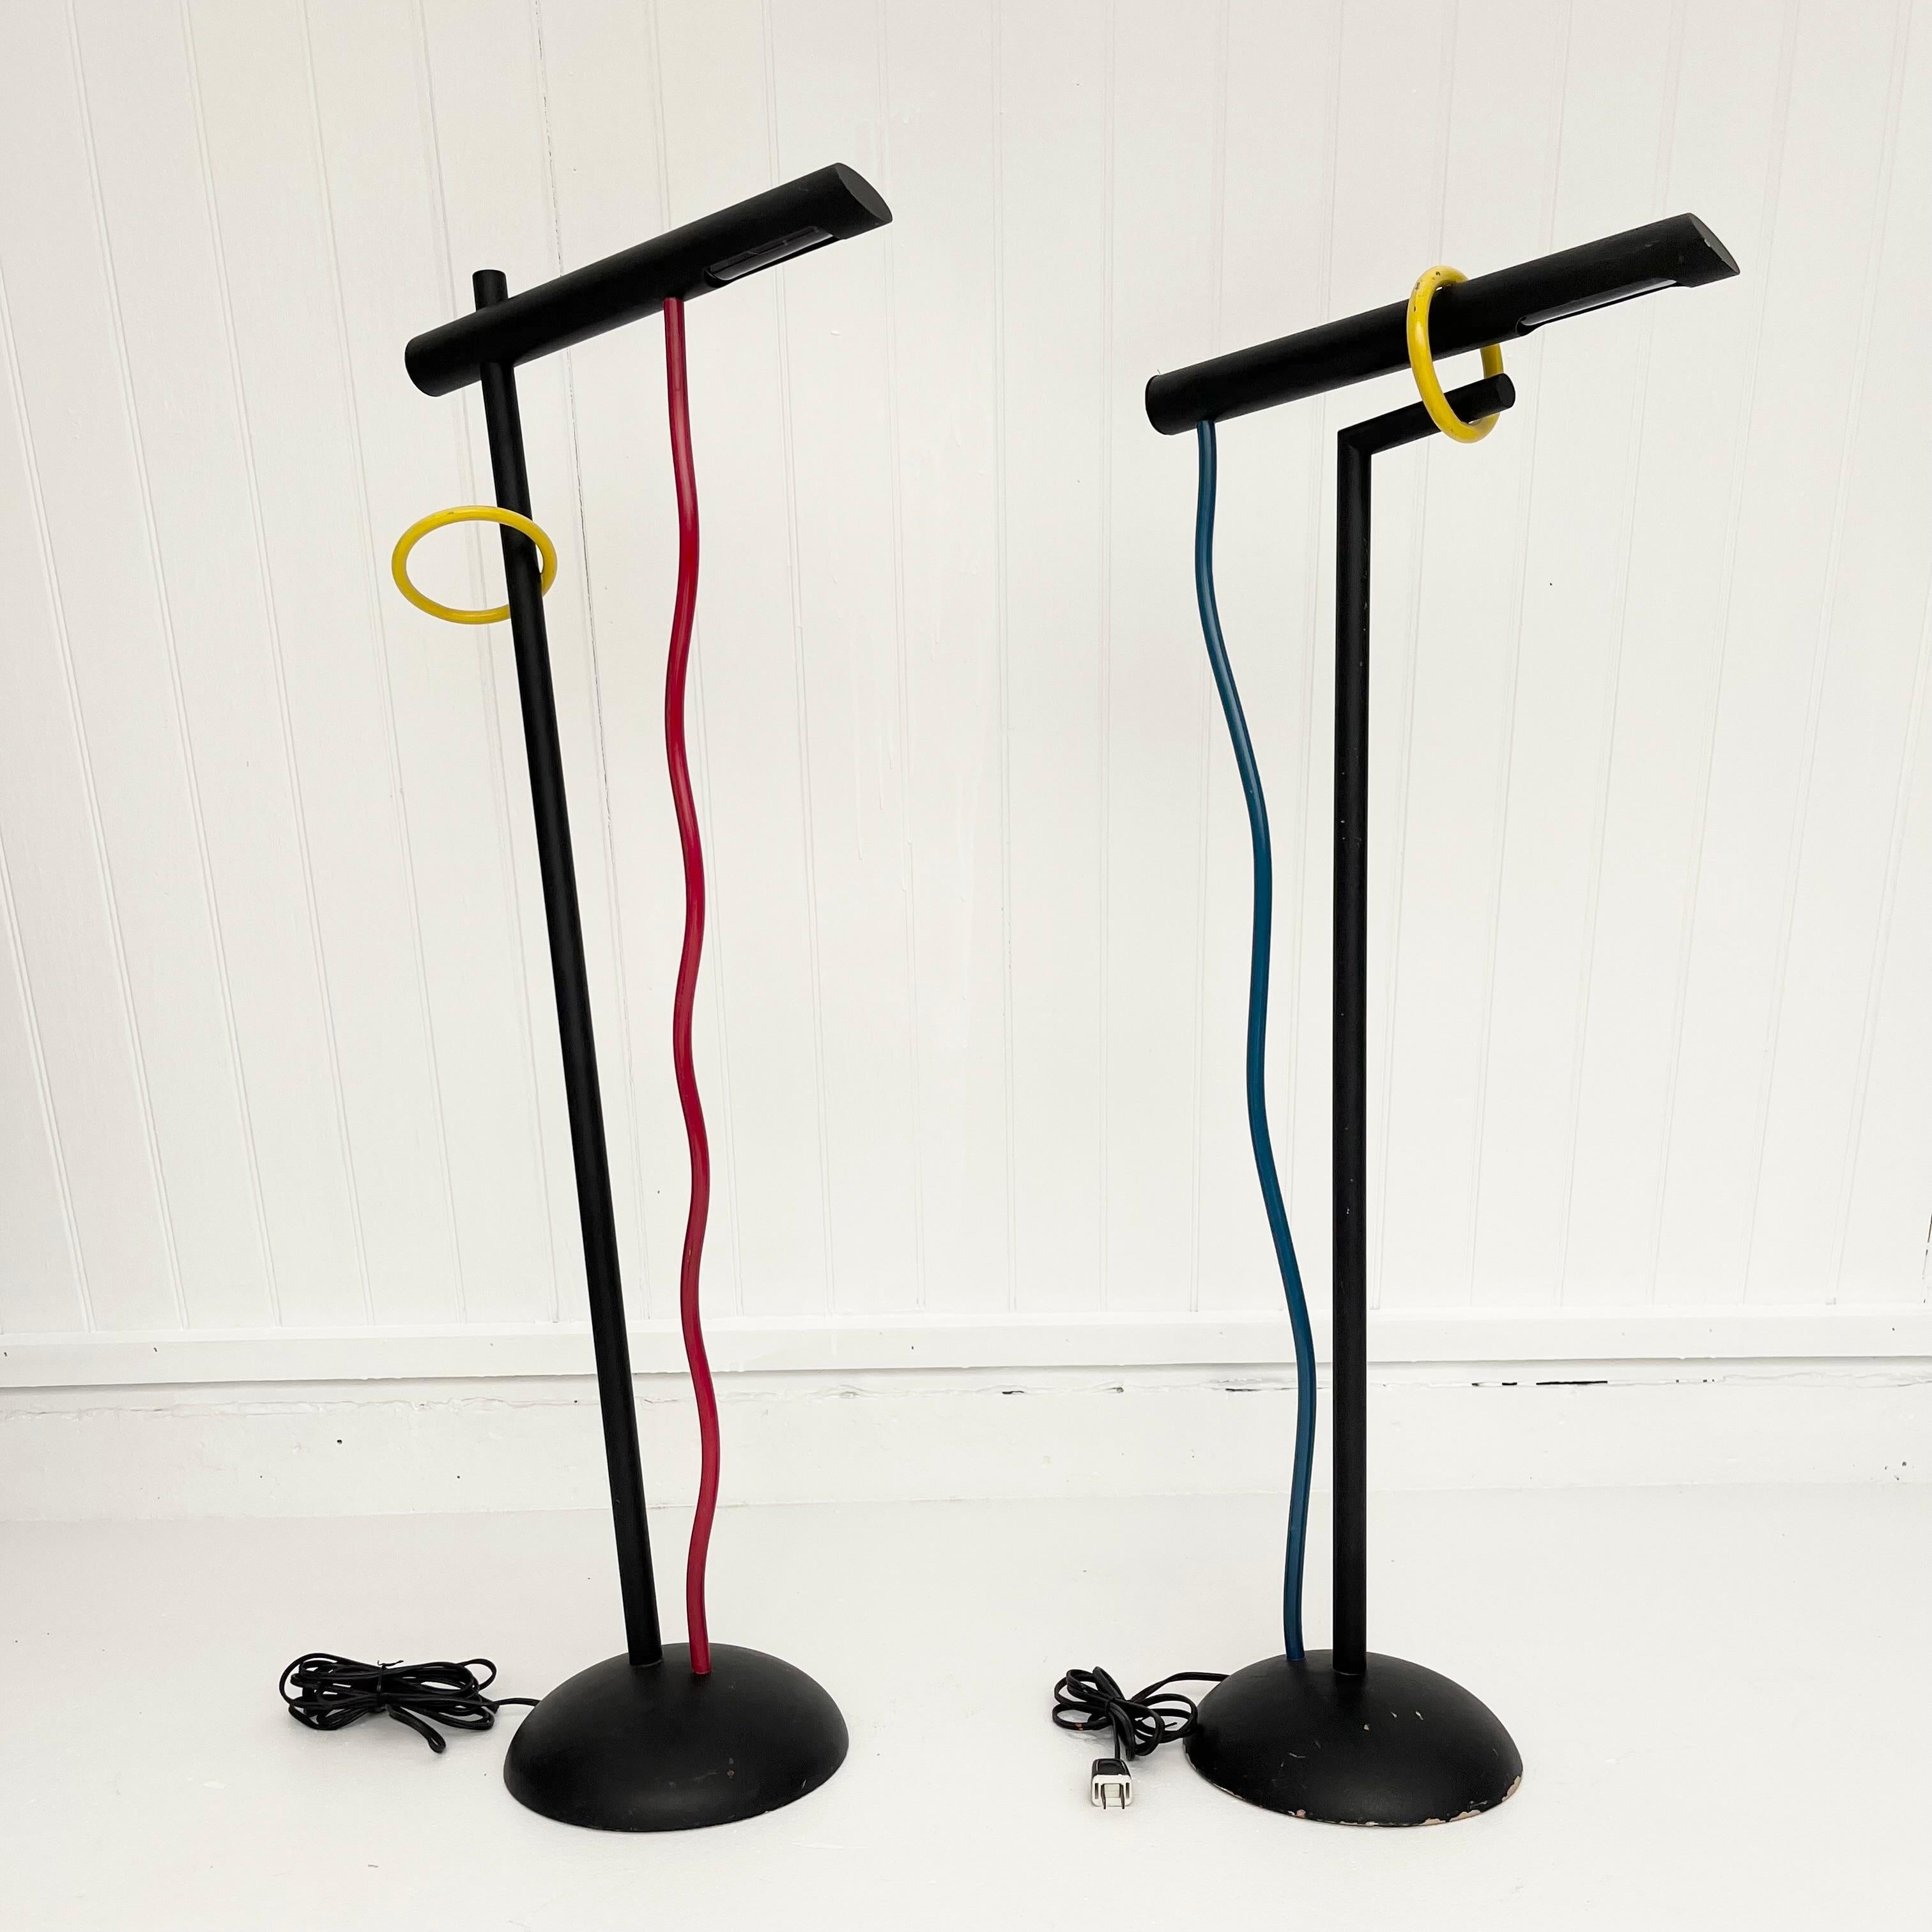 Dynamic pair of 1980s sculptural Memphis-style floor lamps. Both with a black enameled L-shaped body with a wooden base. Each lamp has its own unique abstract linear elements that attach from the lamps' base to the head, both in different colors of